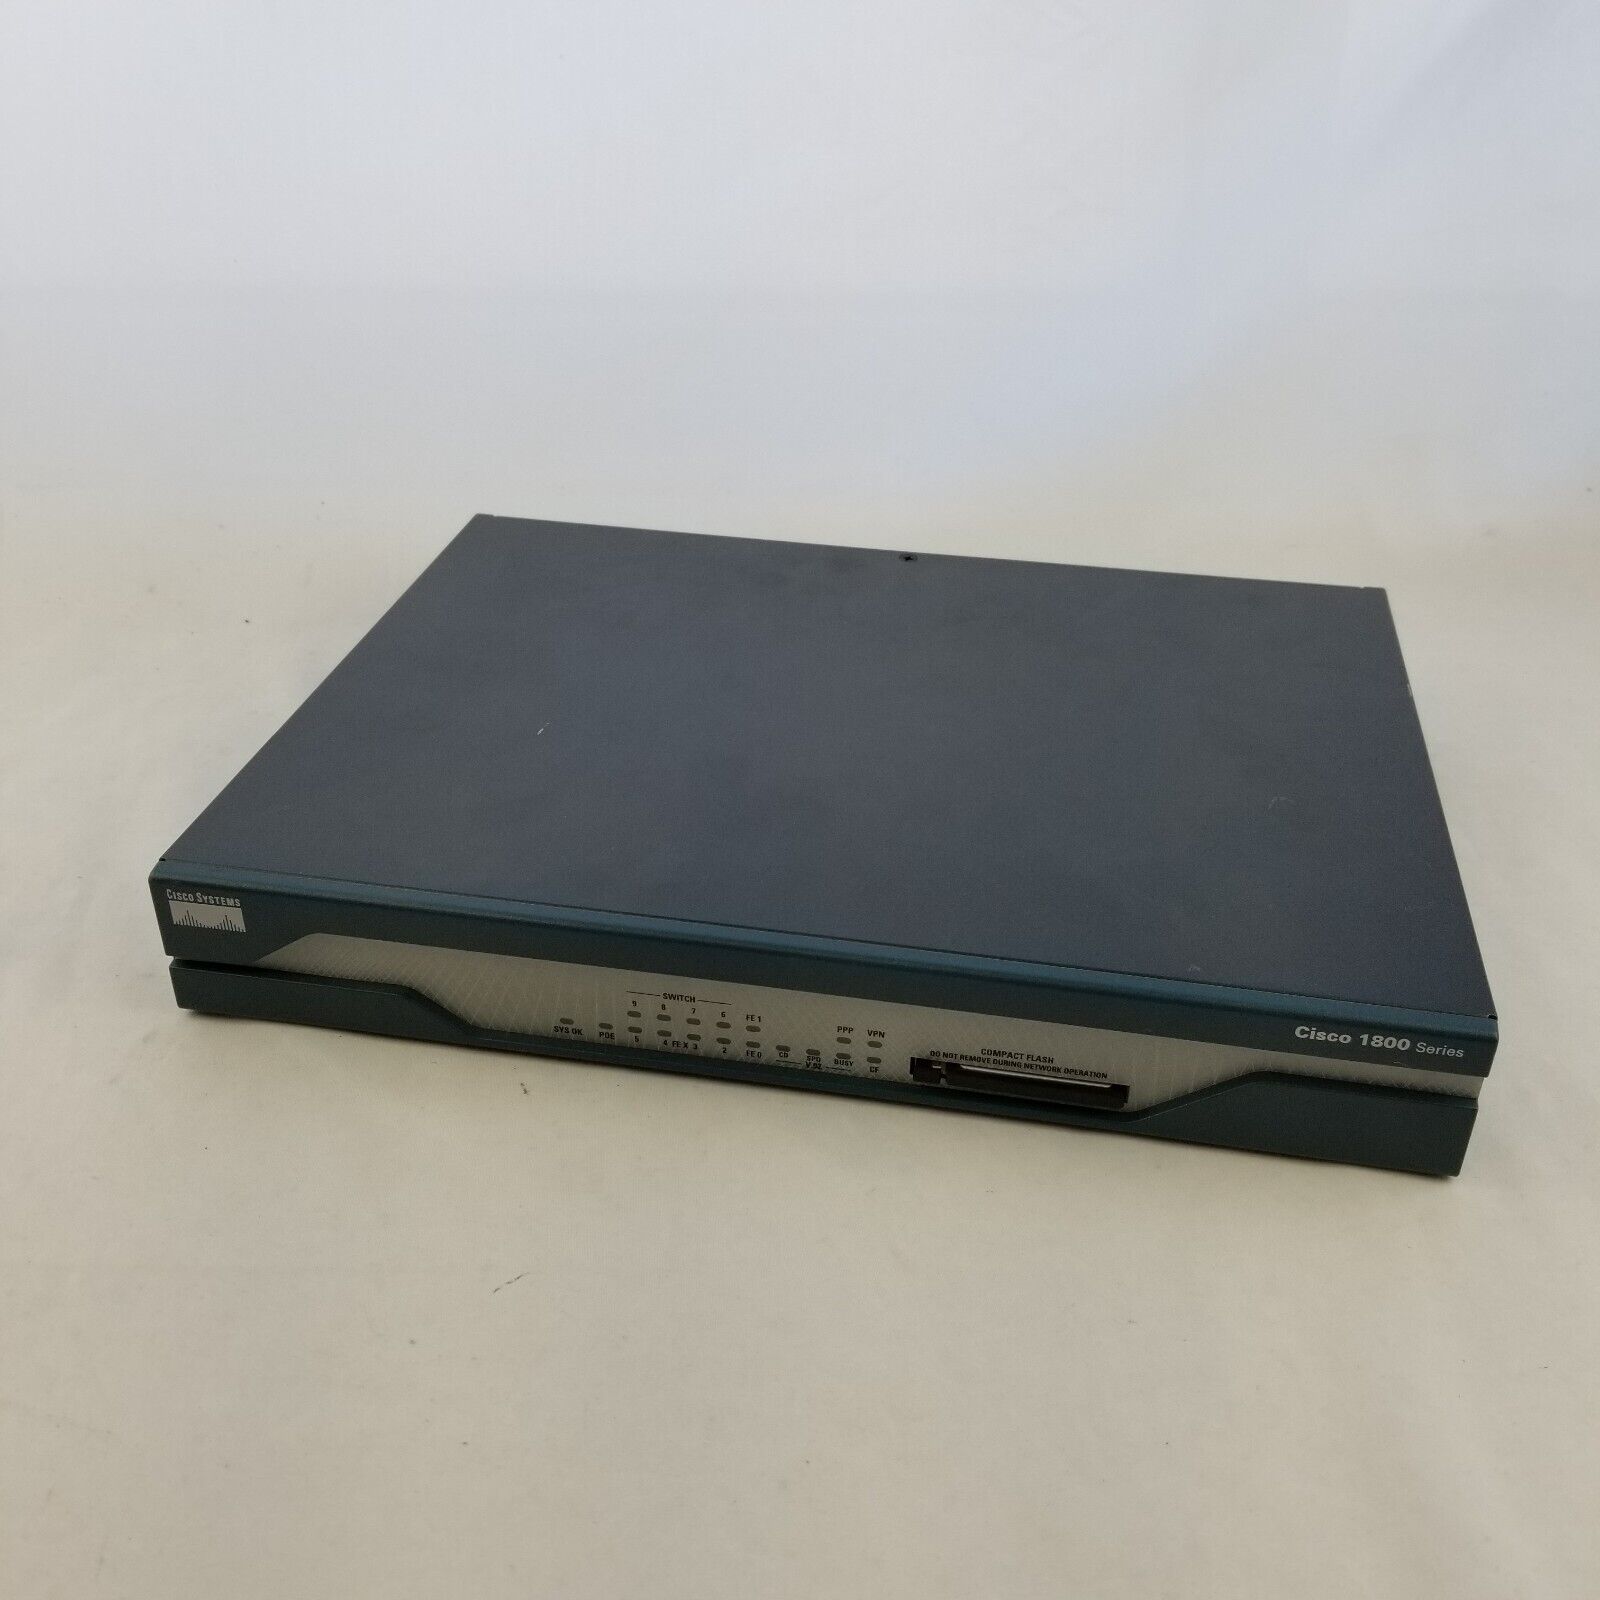 Cisco 1800 Series 1811 8-Port Integrated Services Router w/ 32MB Flash Card